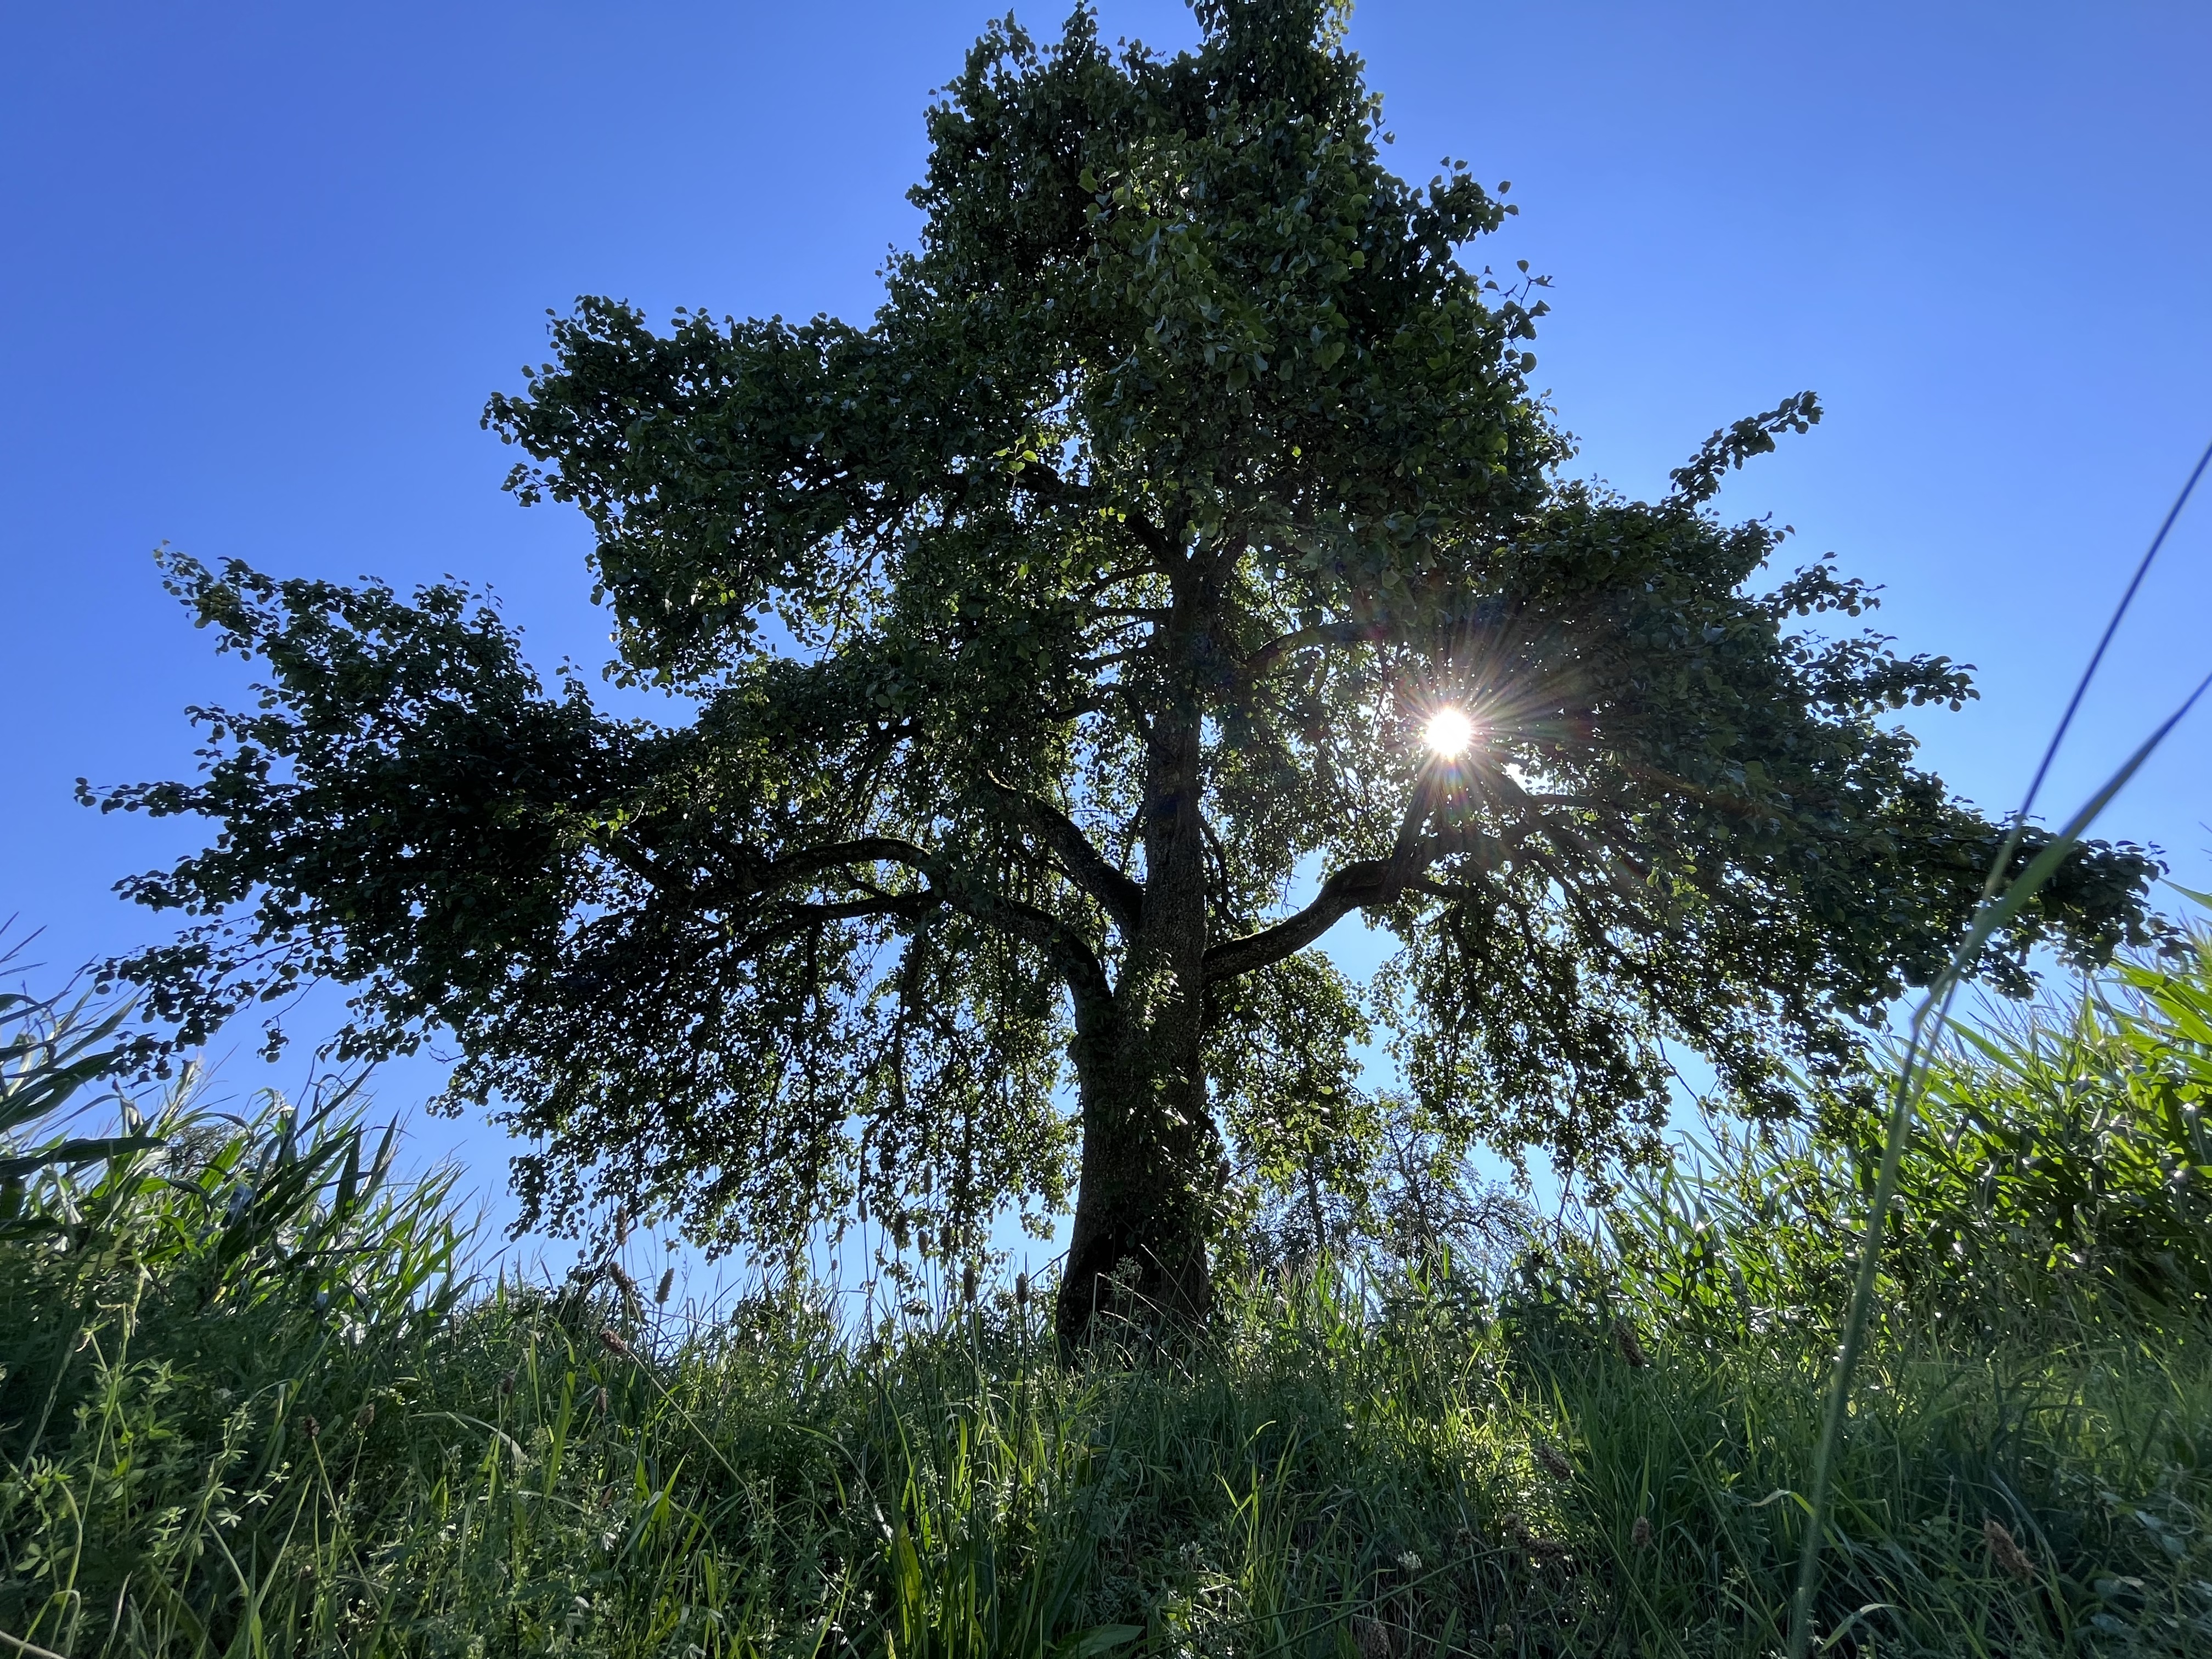 A tree in the foreground in a hot sunny day.